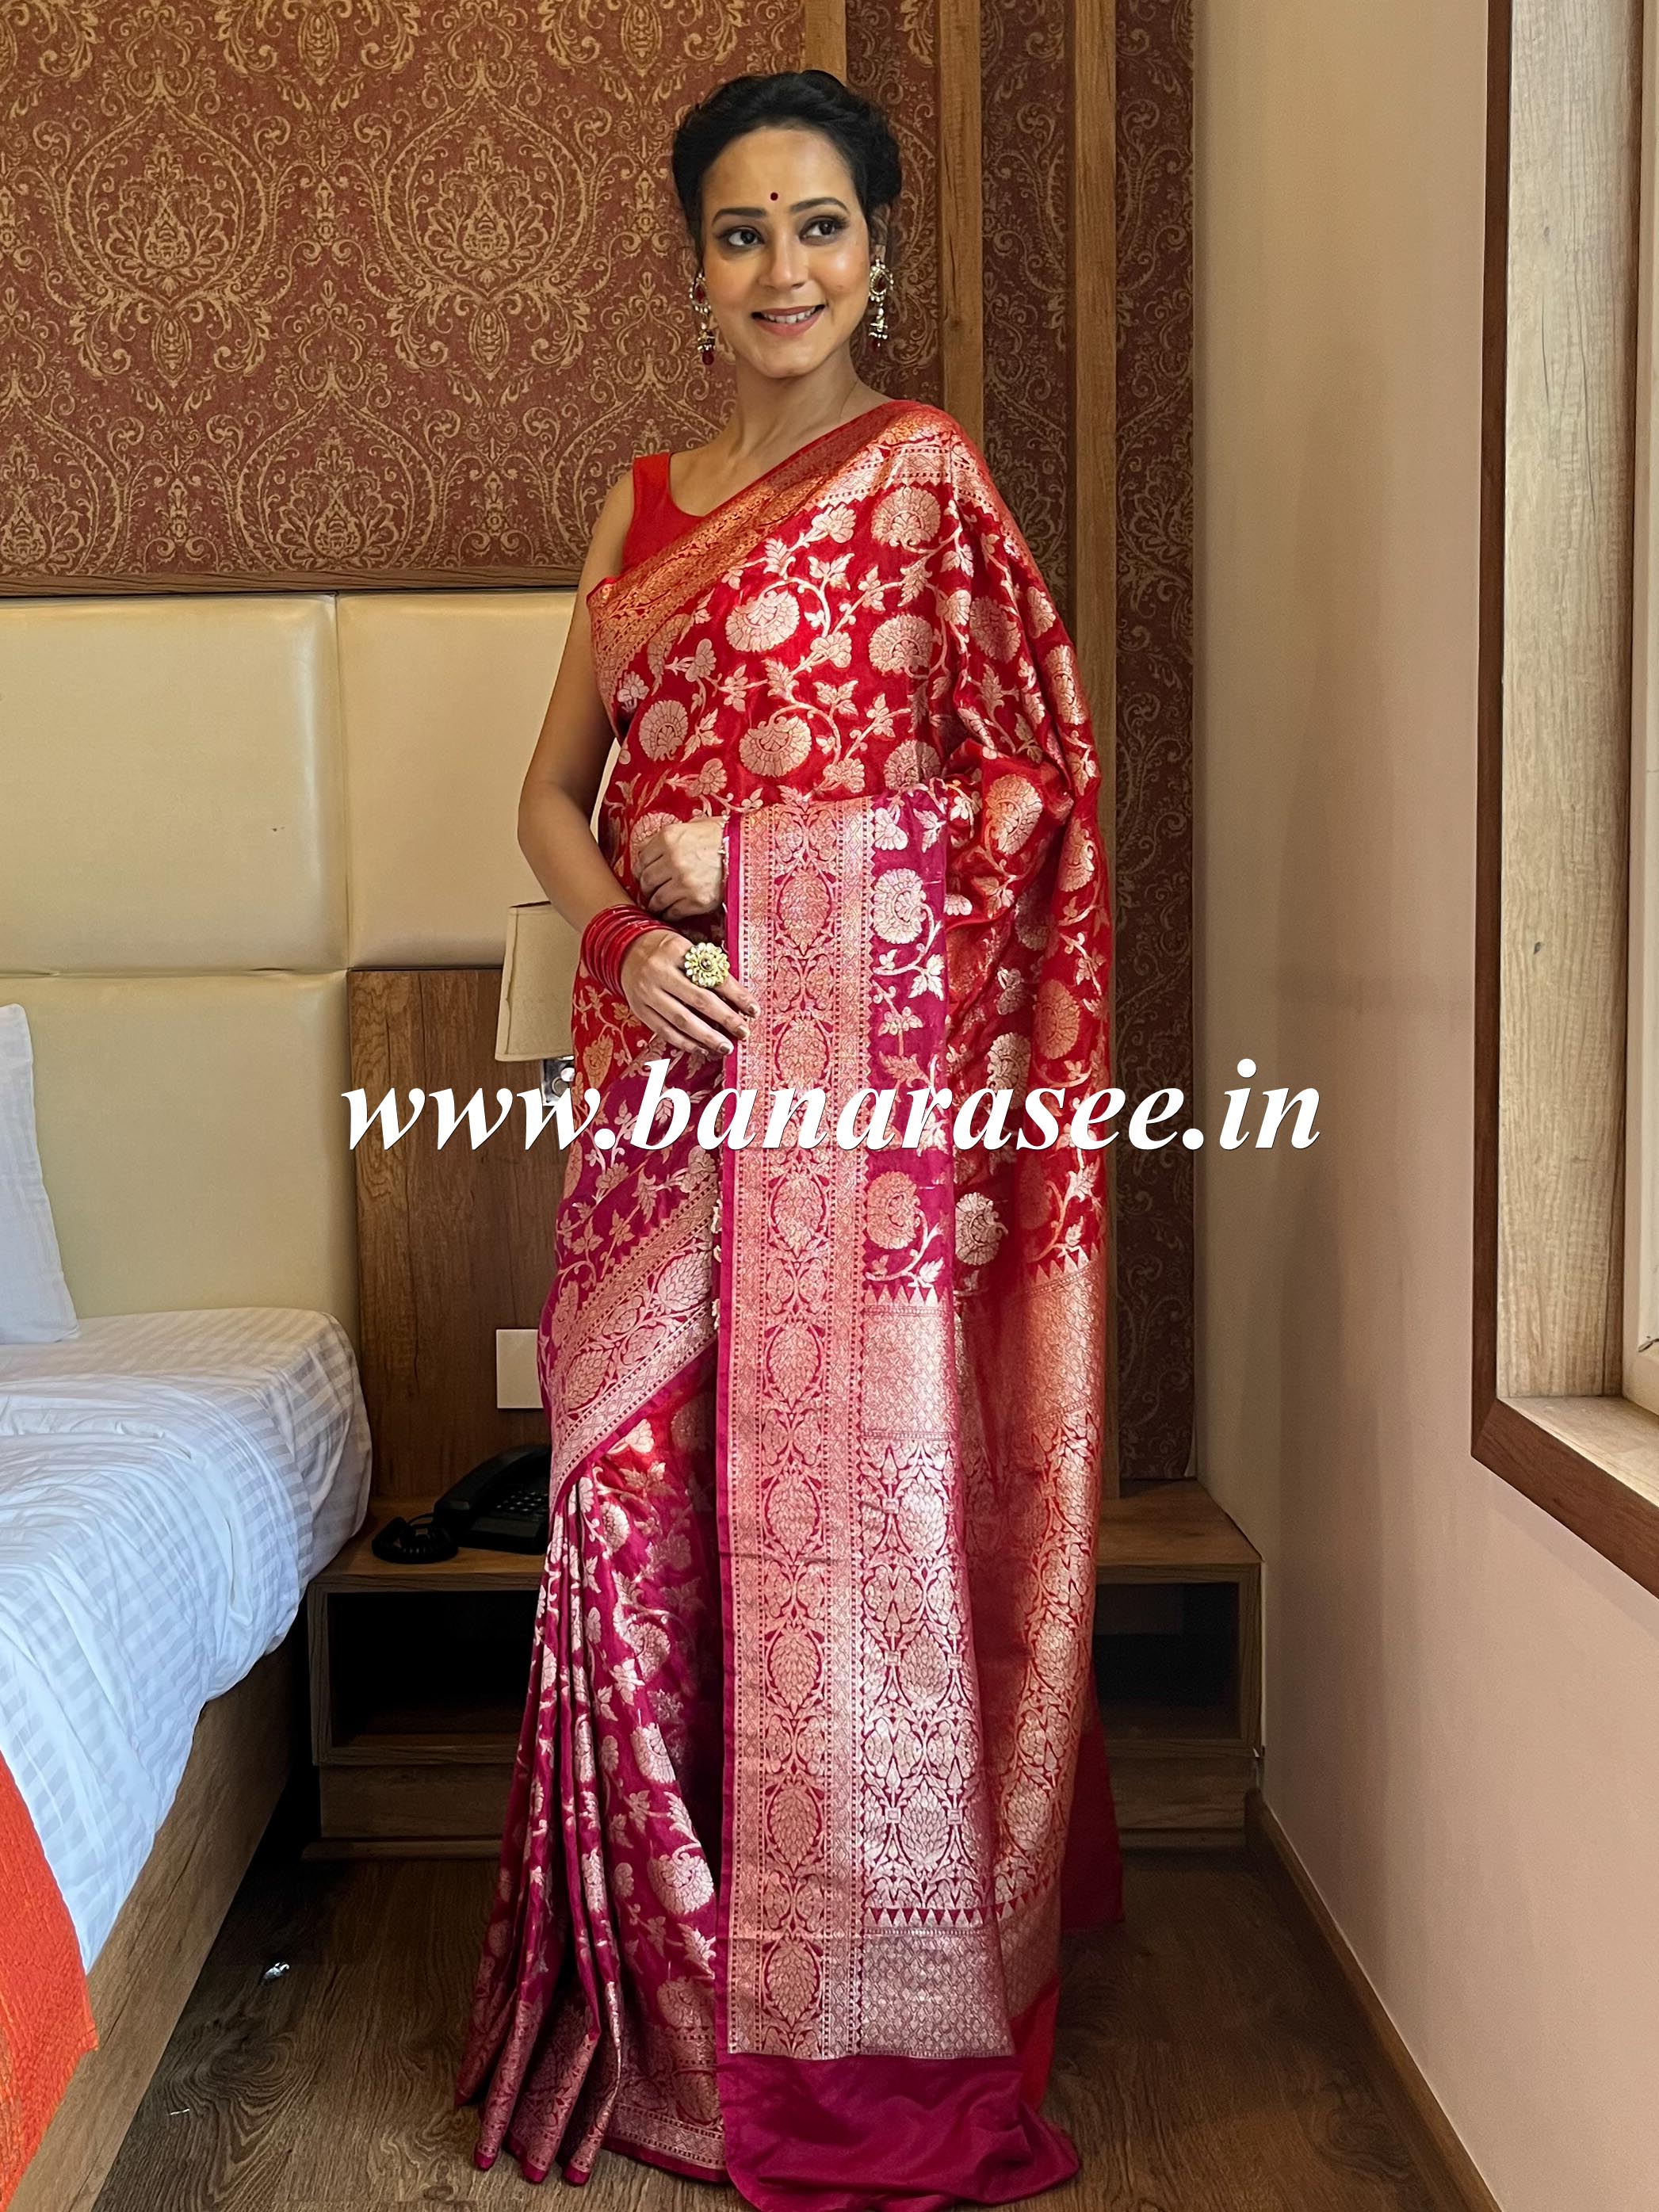 Banarasee Faux Georgette Saree With Gold Zari Jaal Work Dual Color-Red & Pink